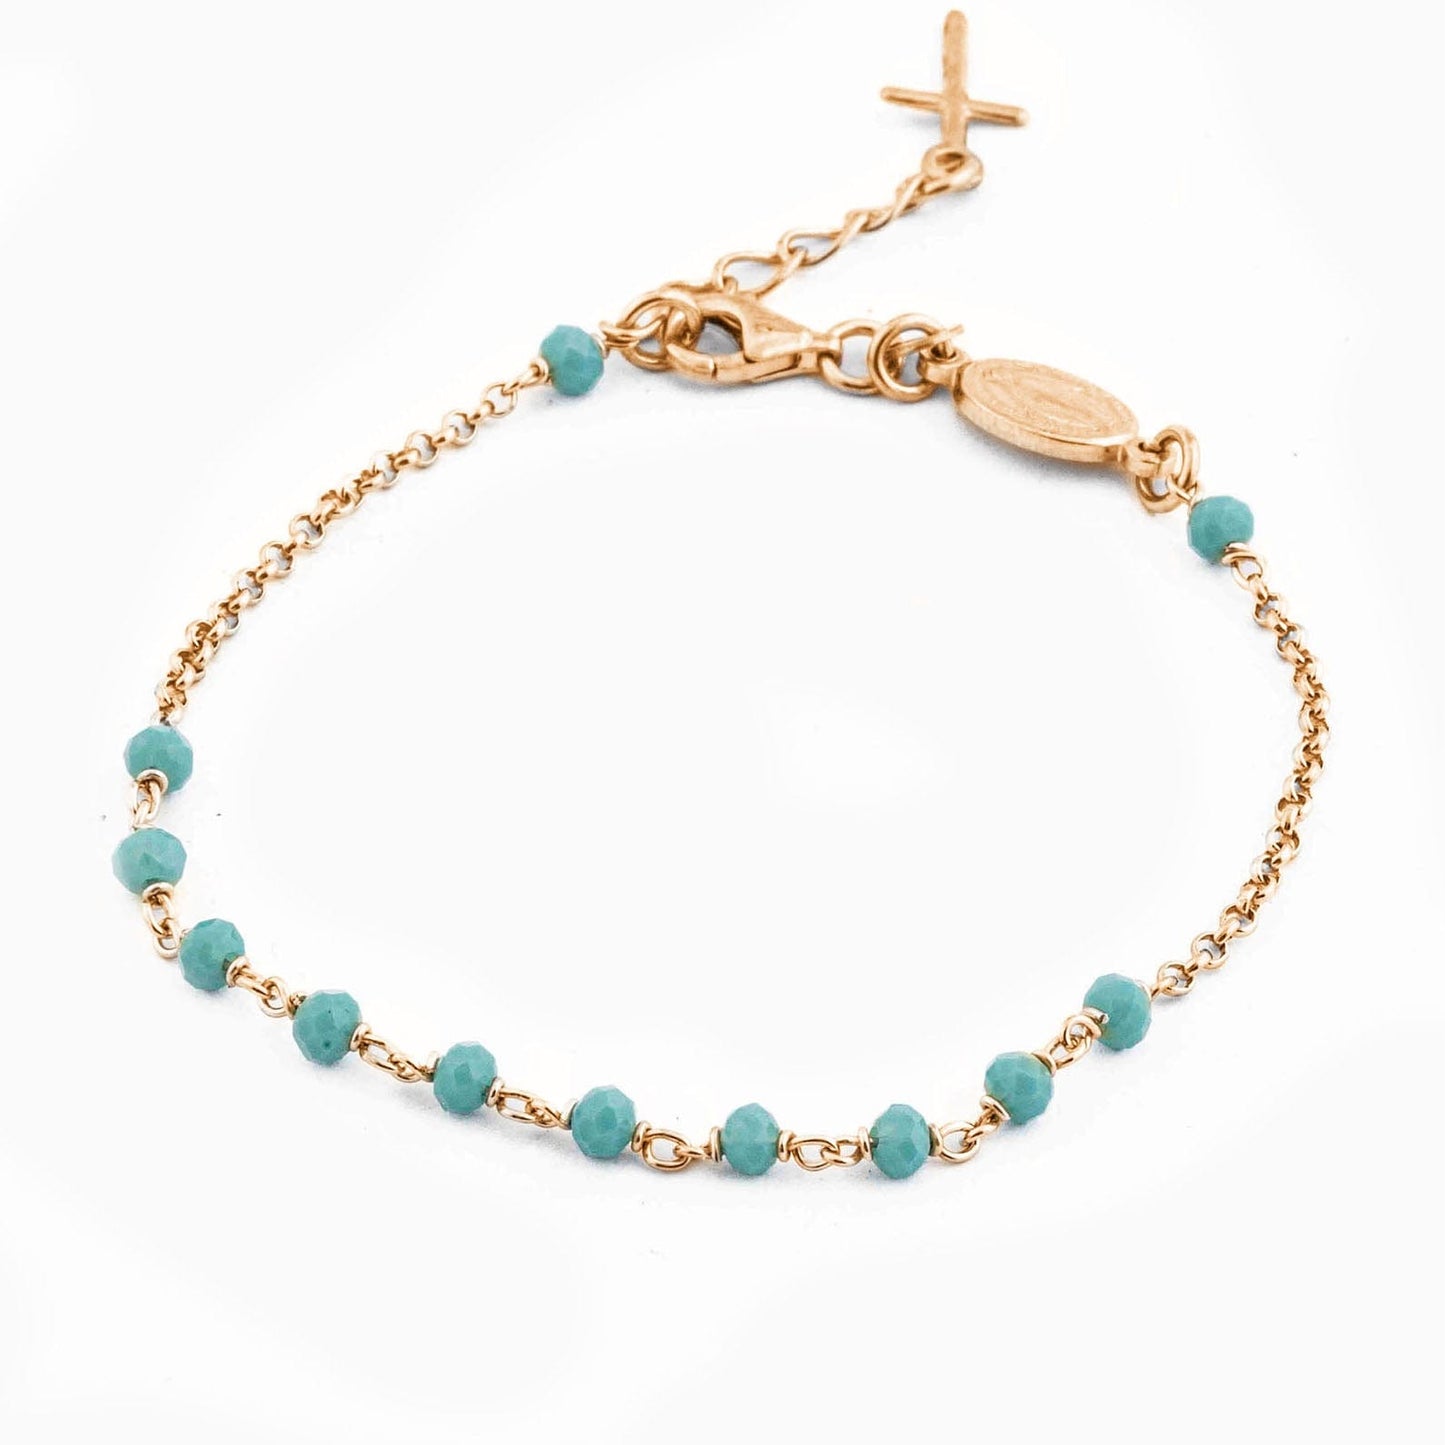 MONDO CATTOLICO Prayer Beads Rose Gold e Turquoise Beads / Cm 17.5 (6.9 in) STERLING SILVER ROSARY BRACELET WITH MIRACULOUS MEDAL AND CROSS FACETED BEADS